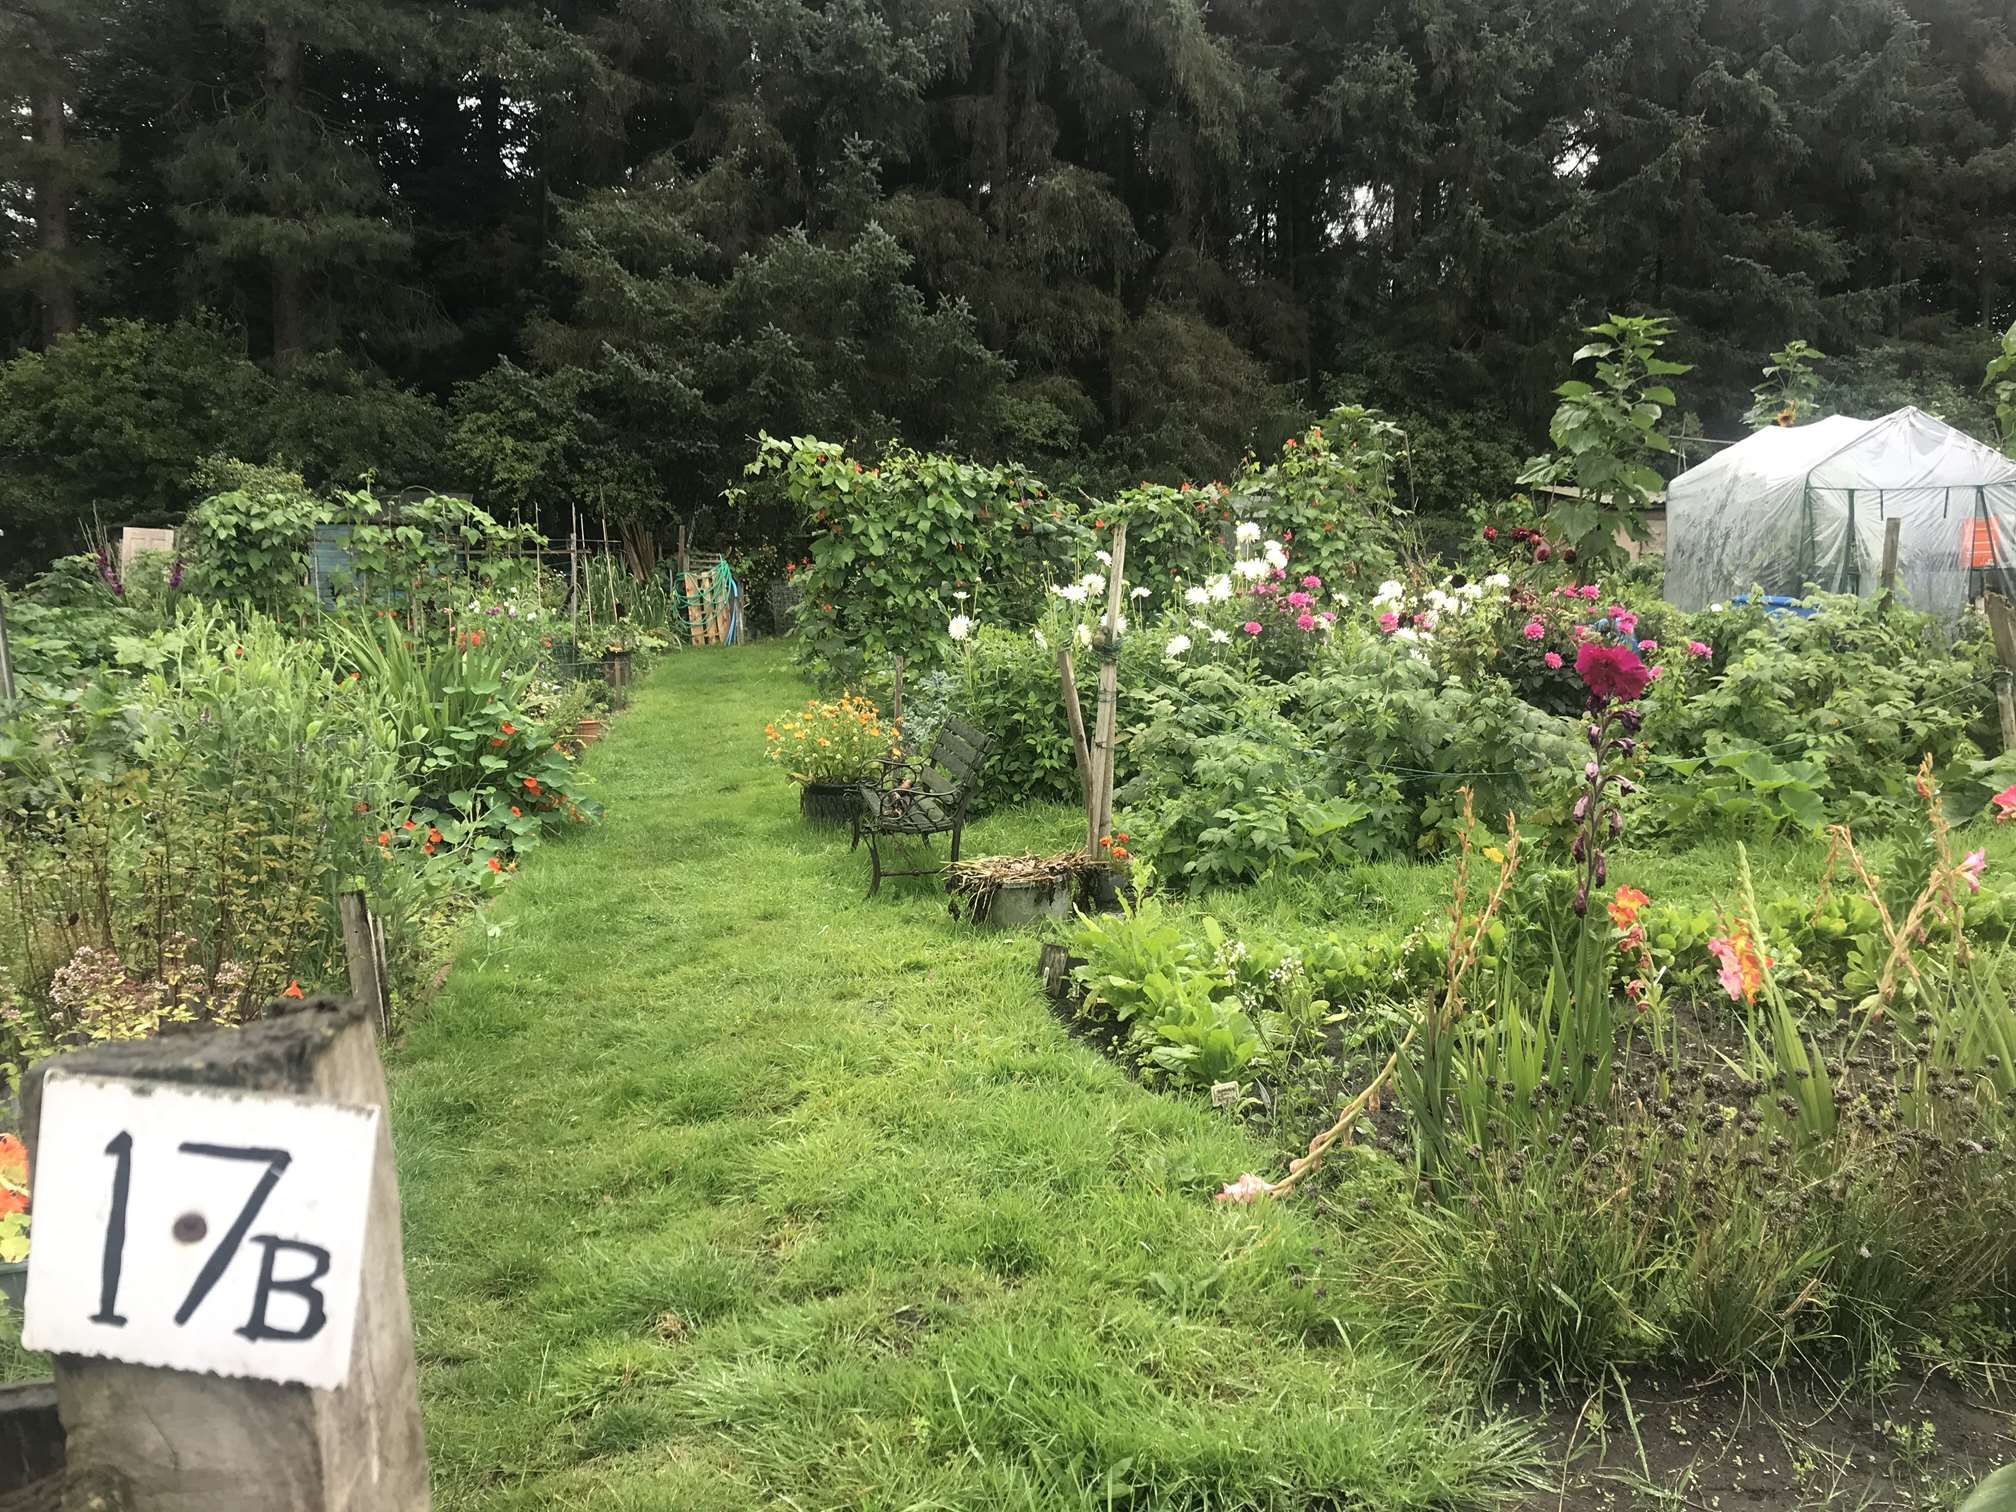 A well cared for allotment